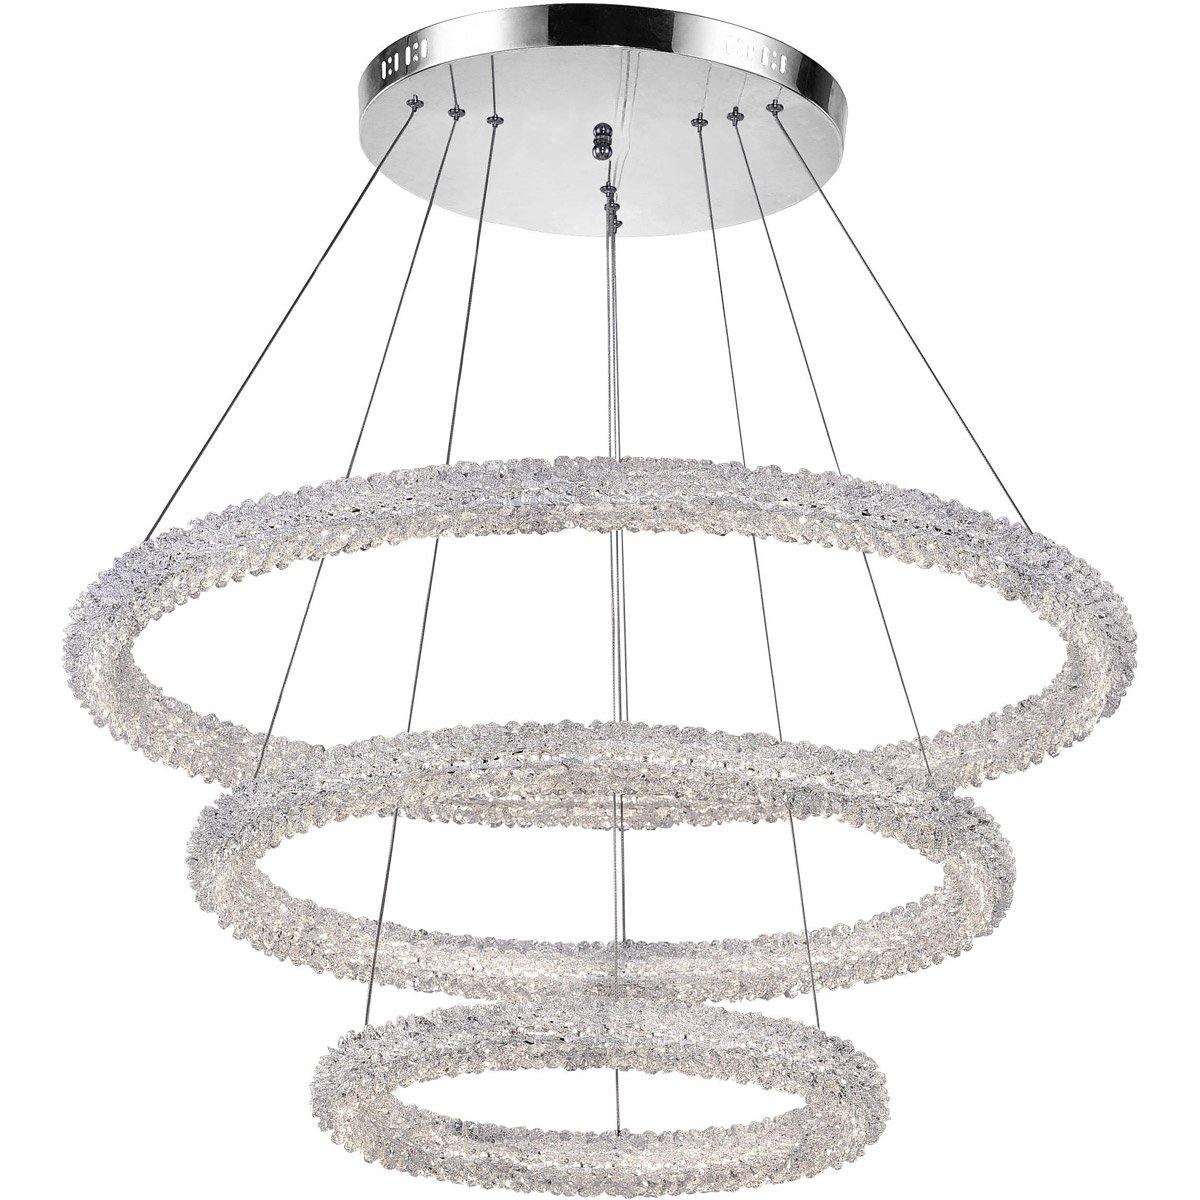 Chrome with Crystal Rings Chandelier - LV LIGHTING